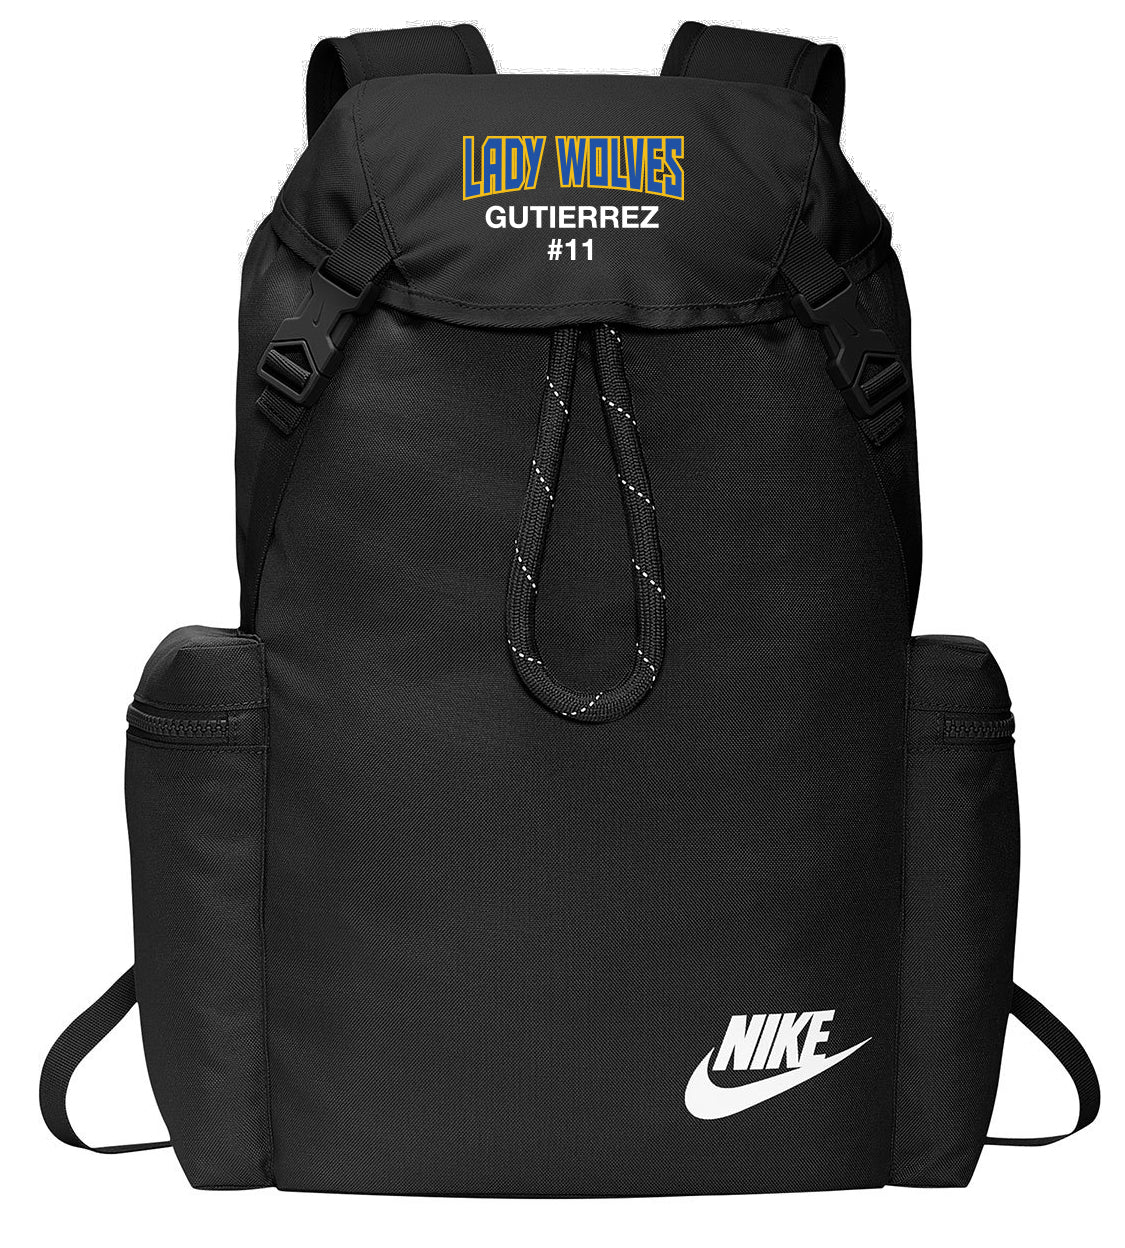 Embroidered Backpack - Golden State Print